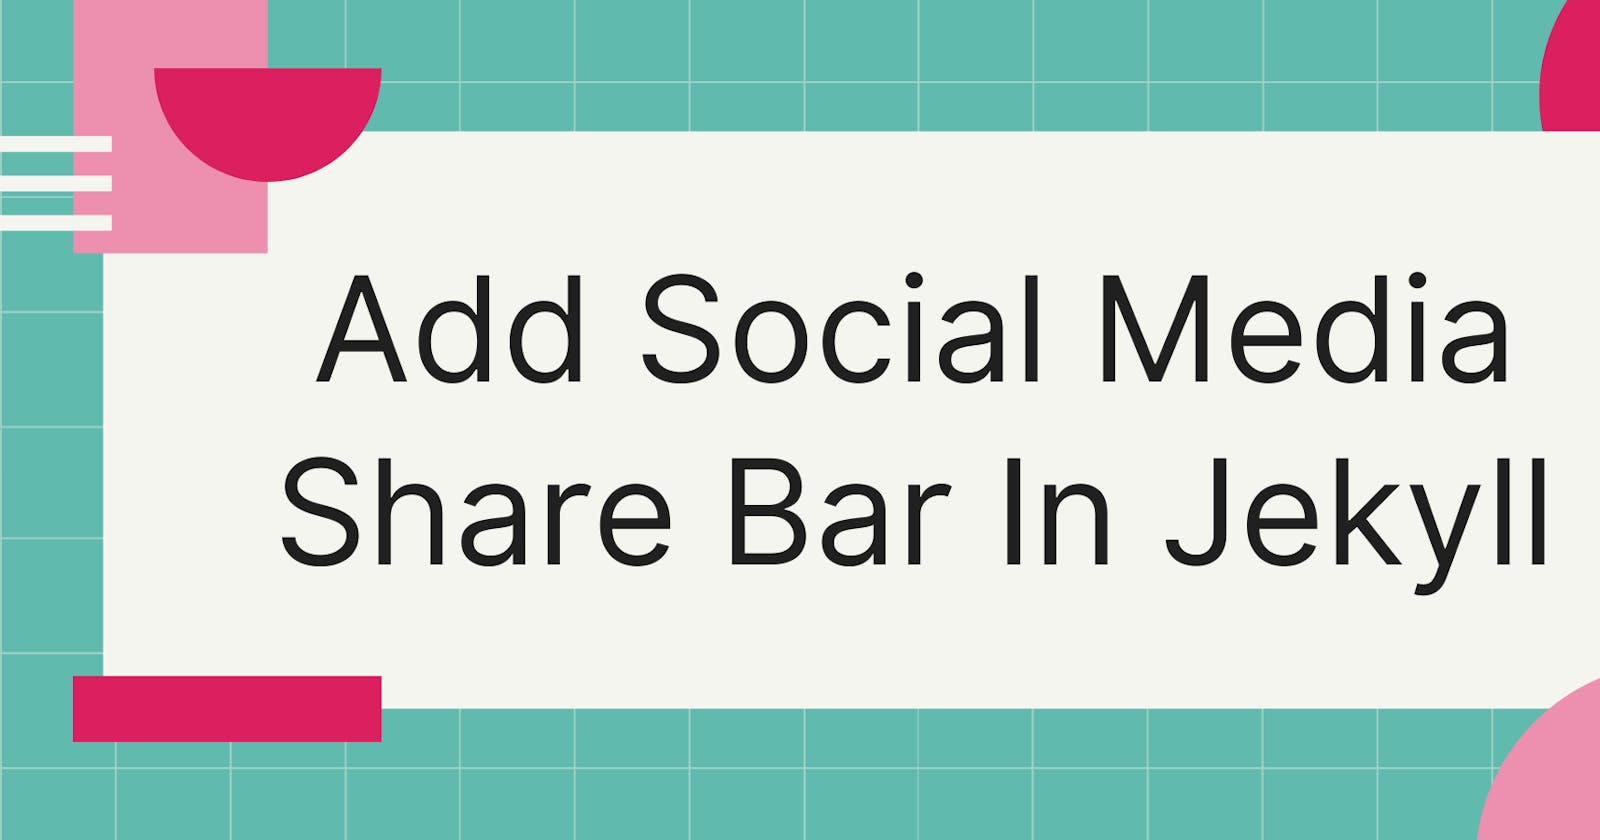 How To Add A Social Media Share Bar In Jekyll